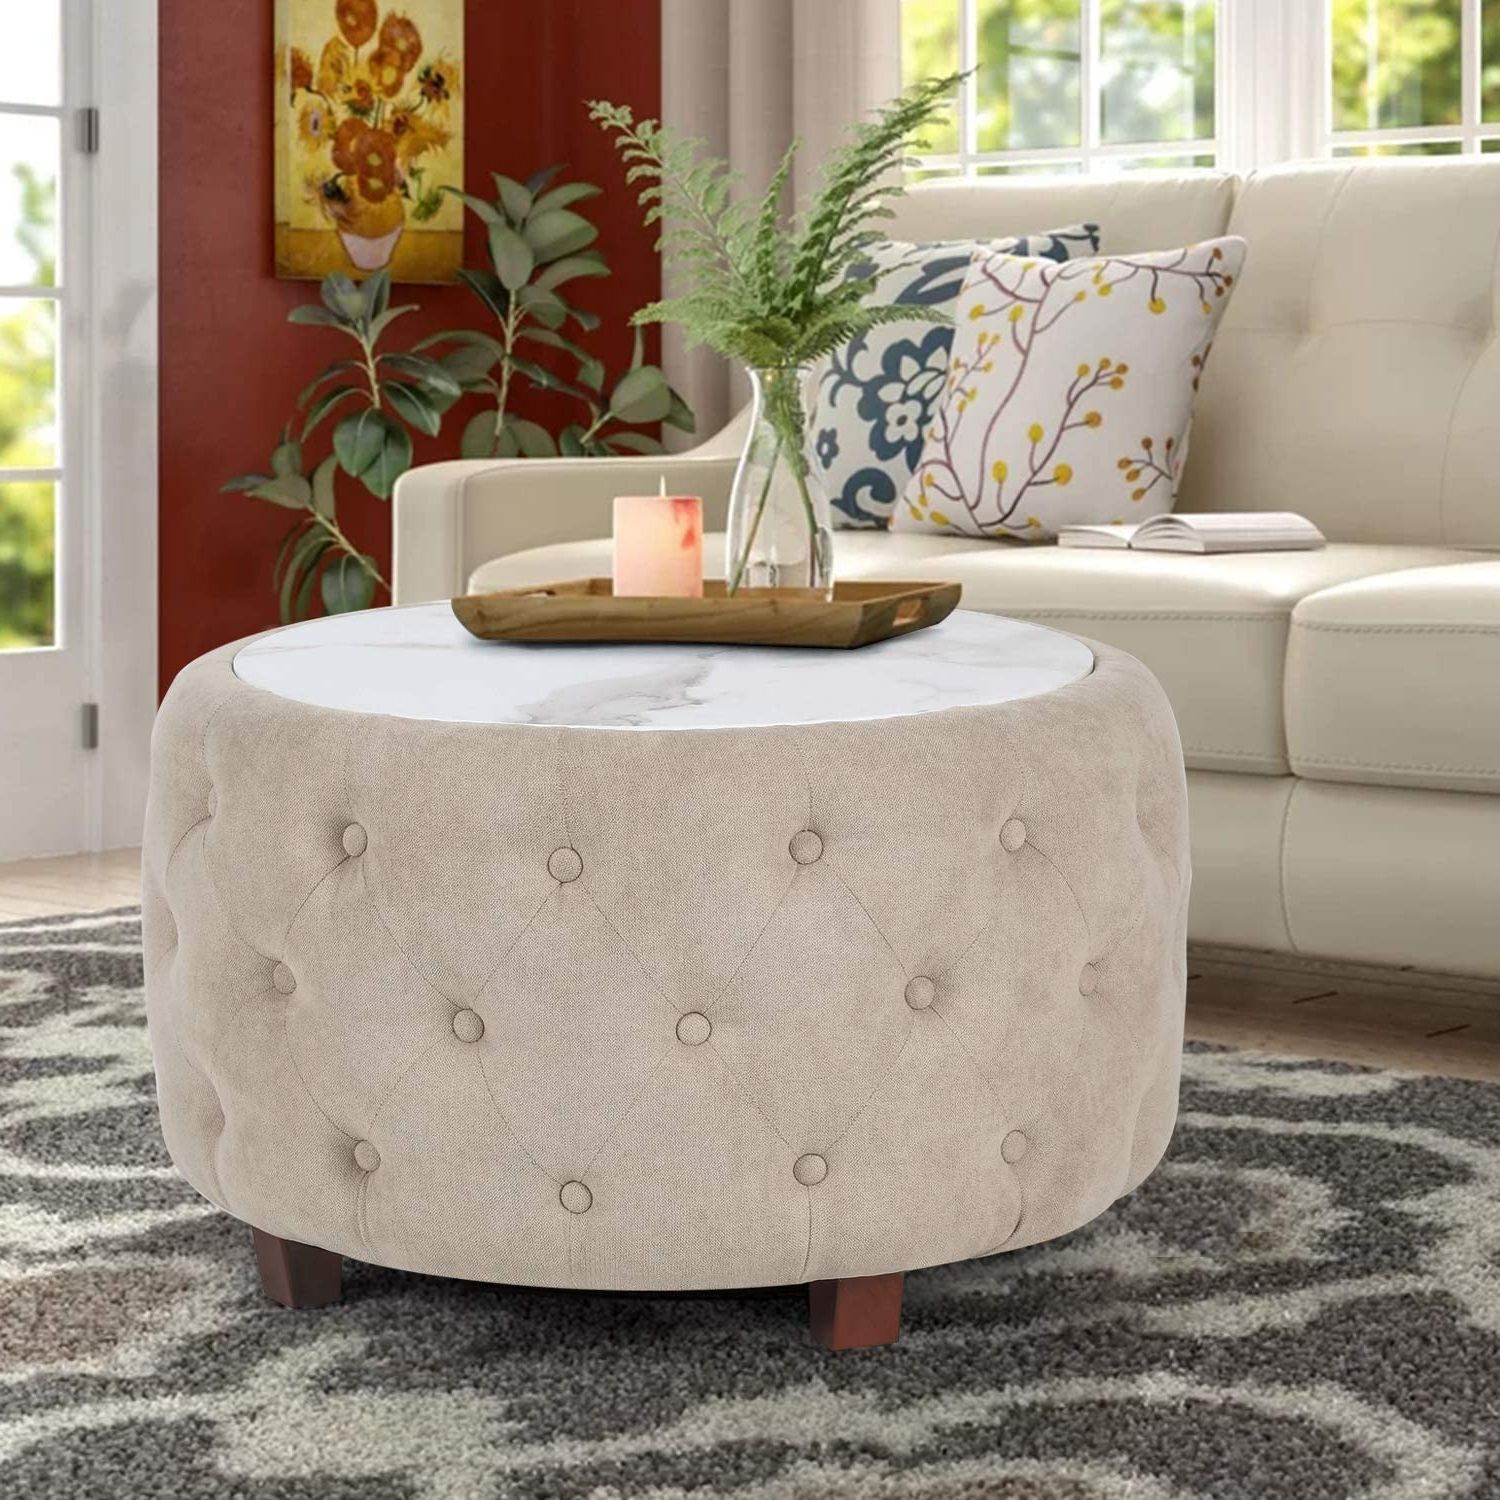 Well Known Beige Cotton Pouf Ottomans Throughout Homebeez Fabric Round Ottoman Coffee Table Footstool  (View 7 of 10)